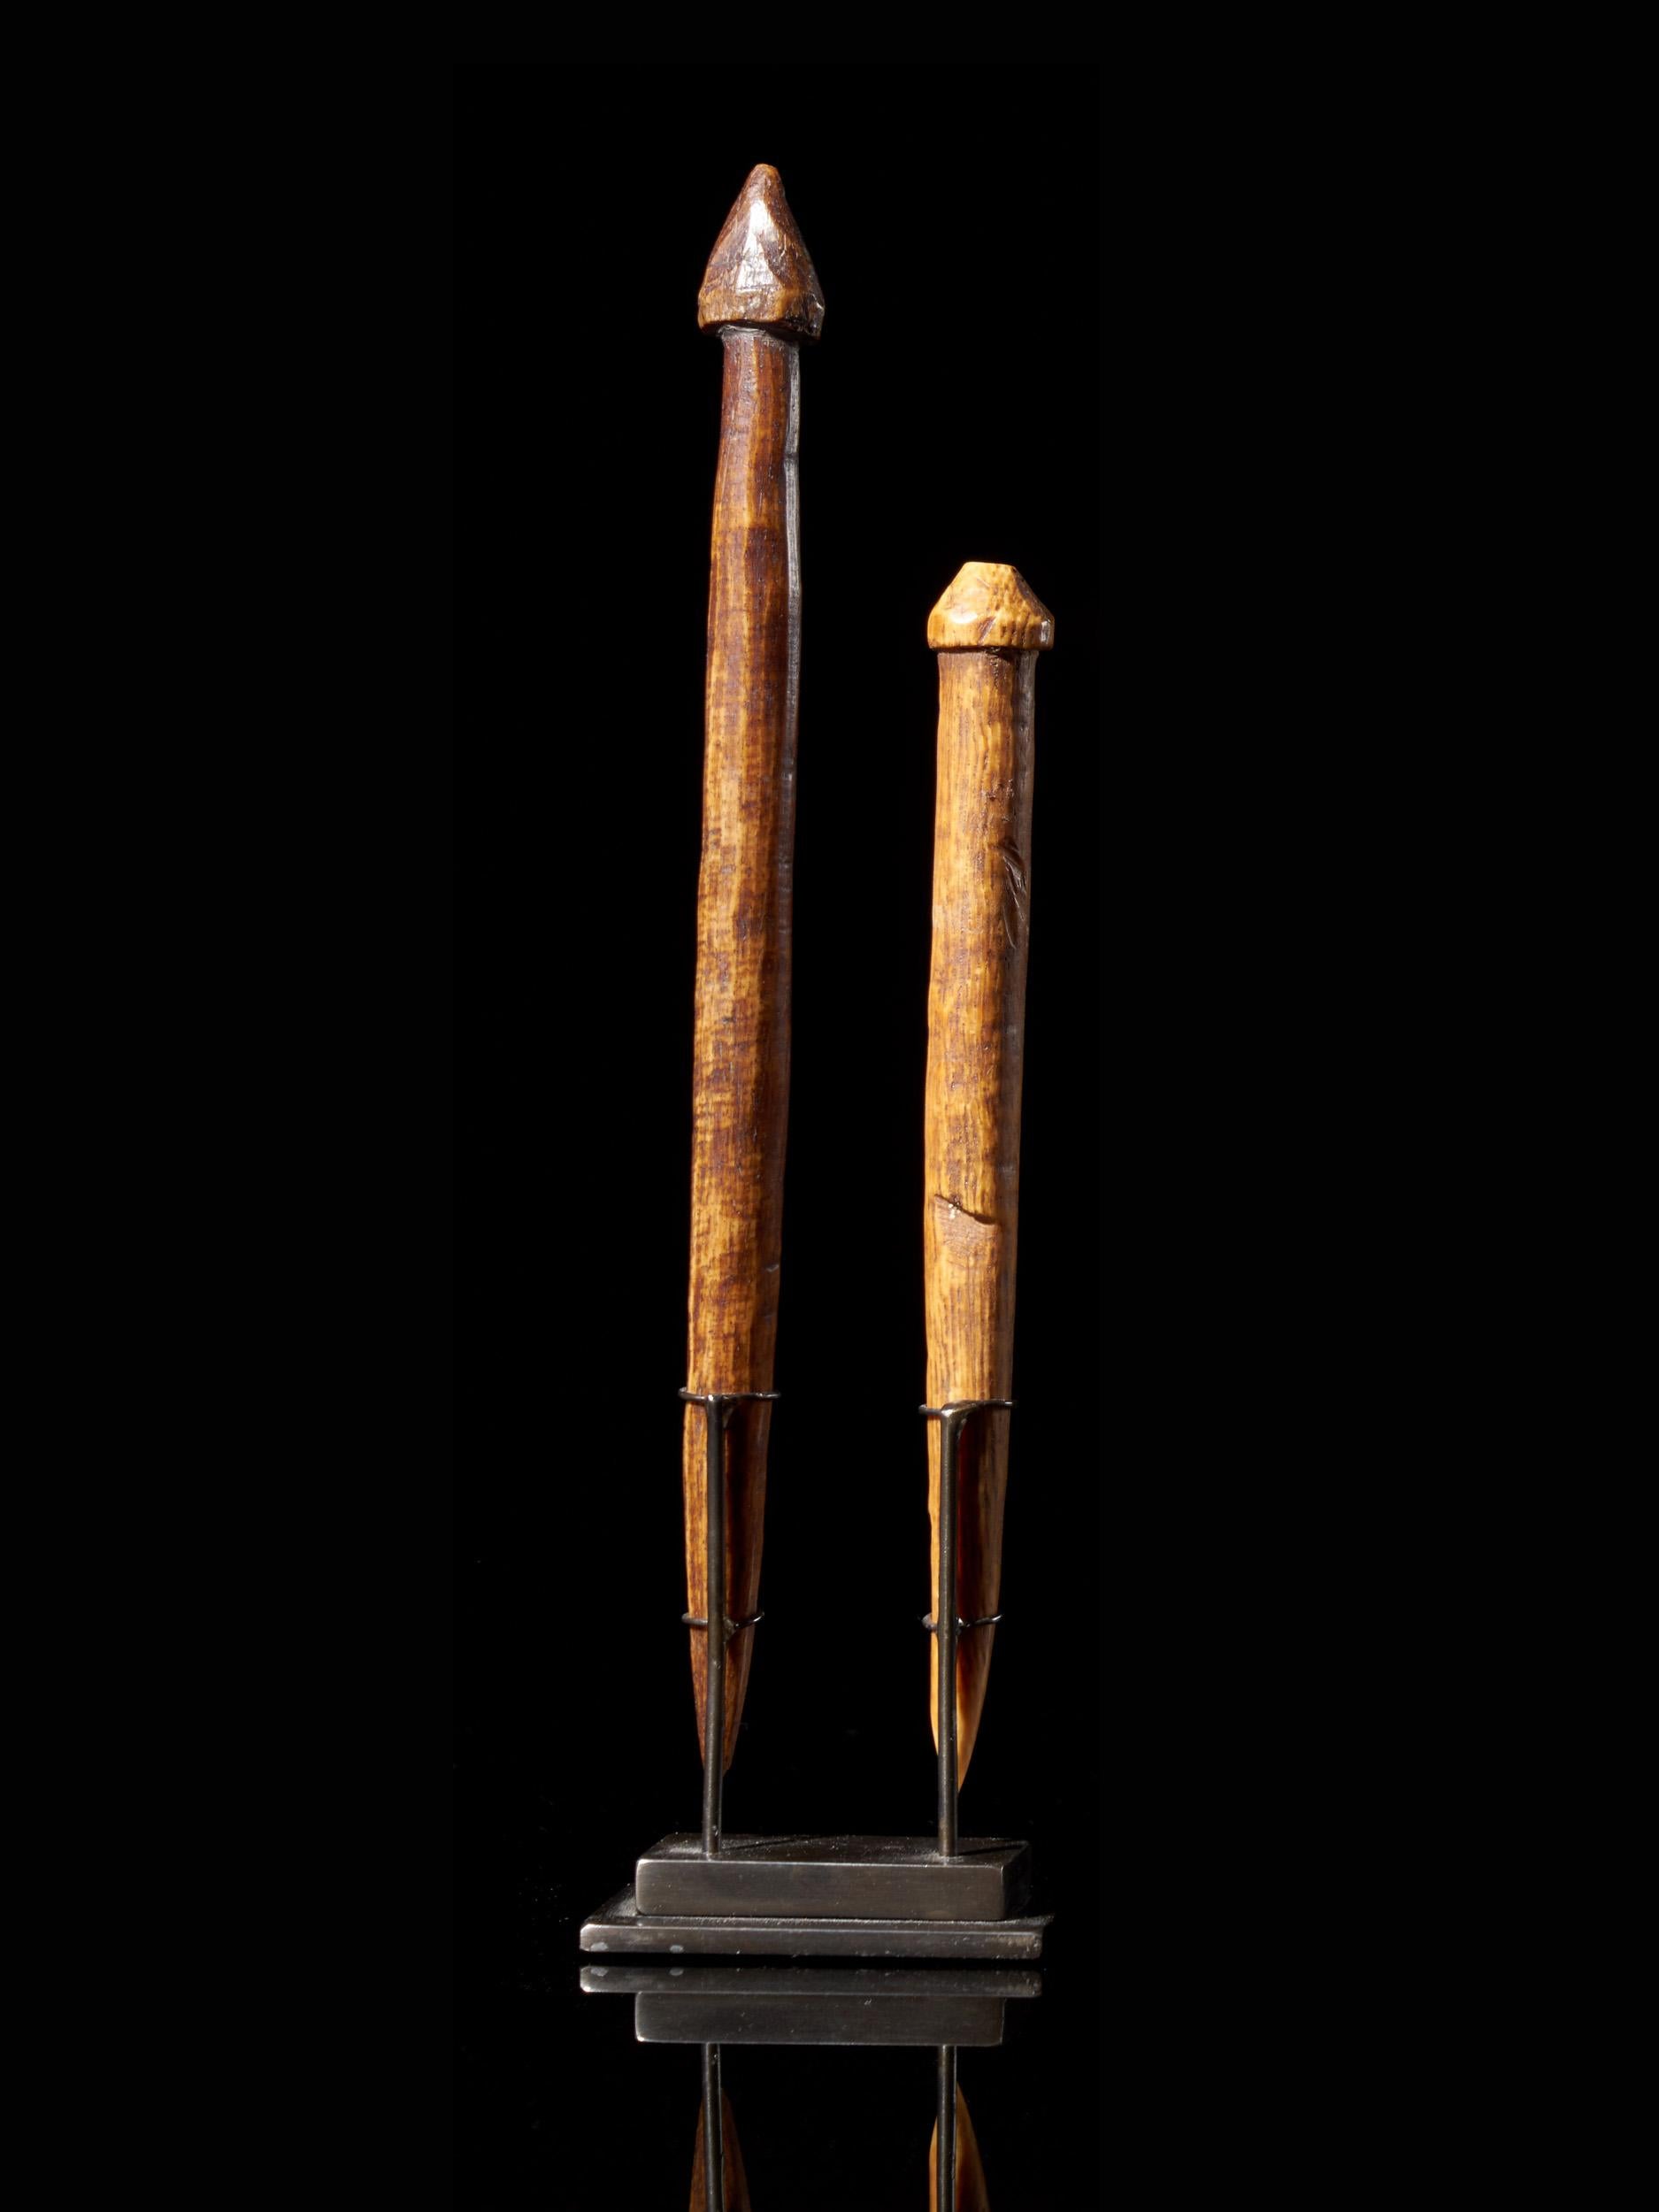 Lega People, DRC.
Two ceremonial bone Hairpins from the Lega people in DRC.